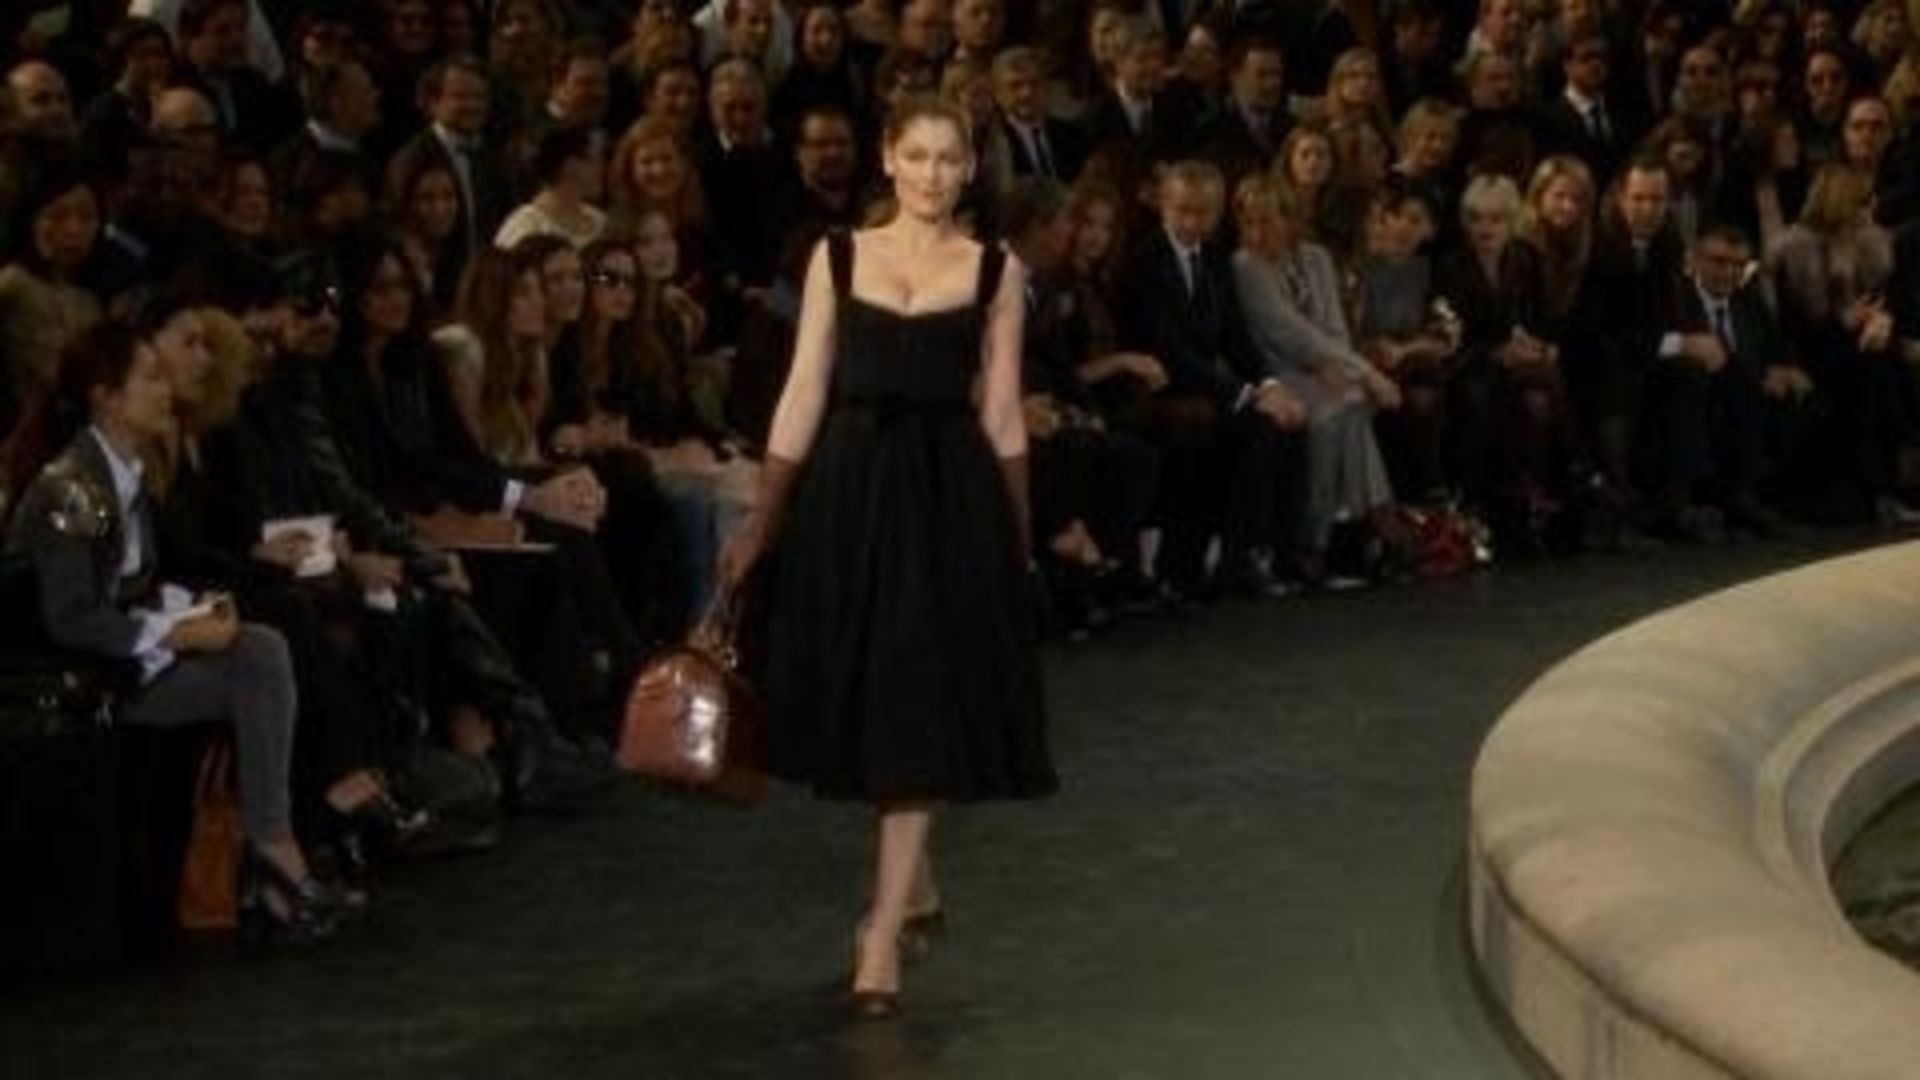 Watch: Louis Vuitton release incredible behind-the-scenes footage